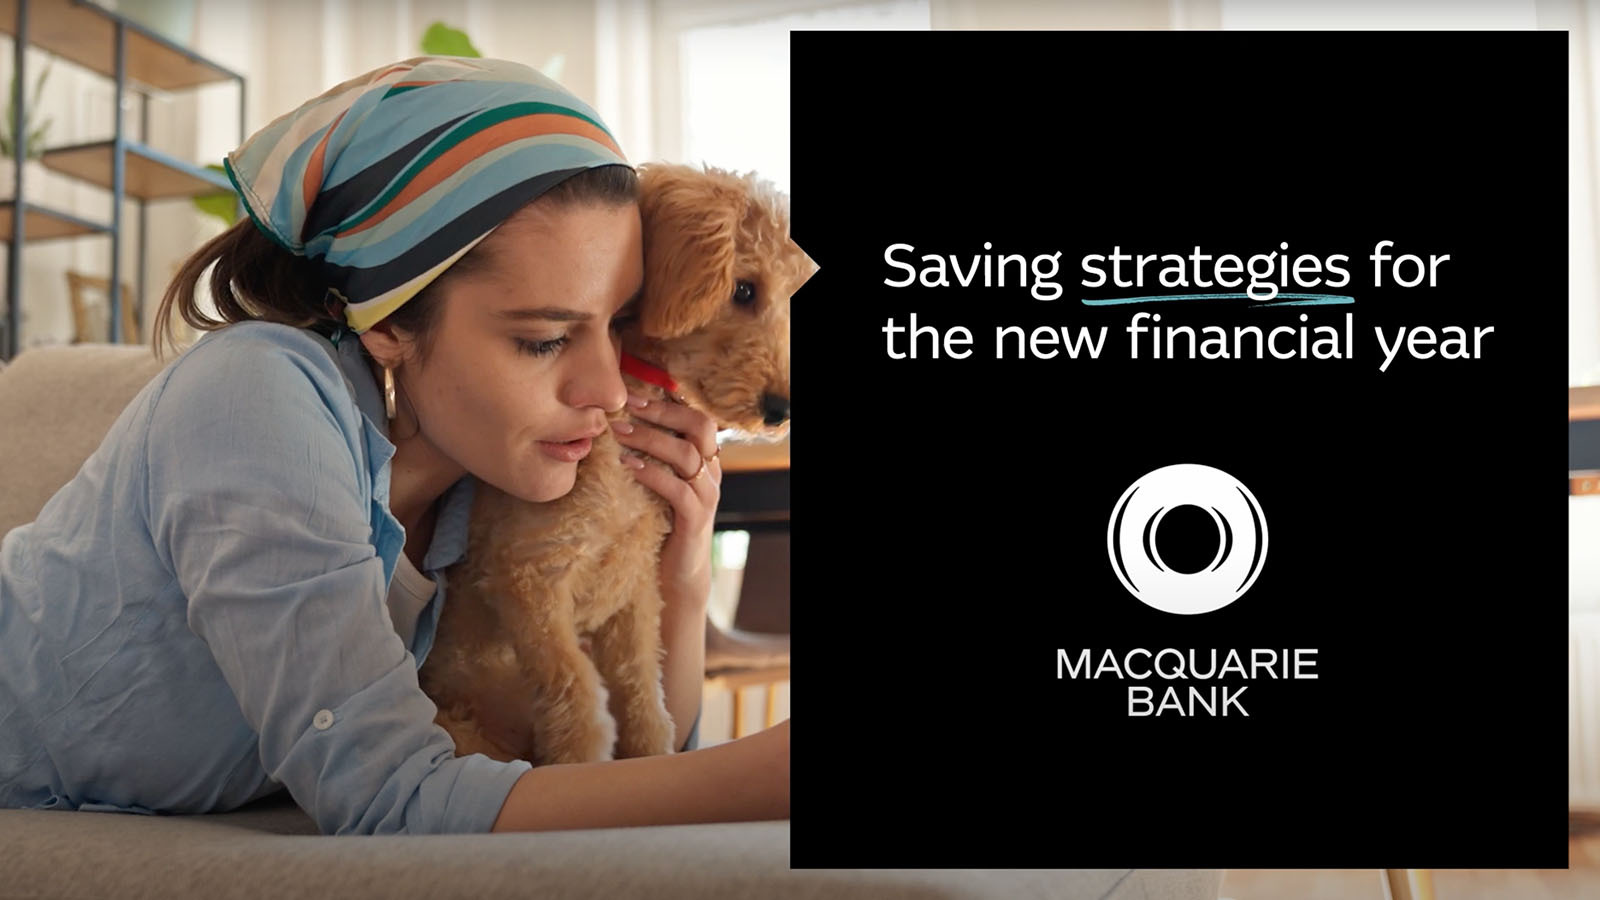  Saving strategies for the new financial year